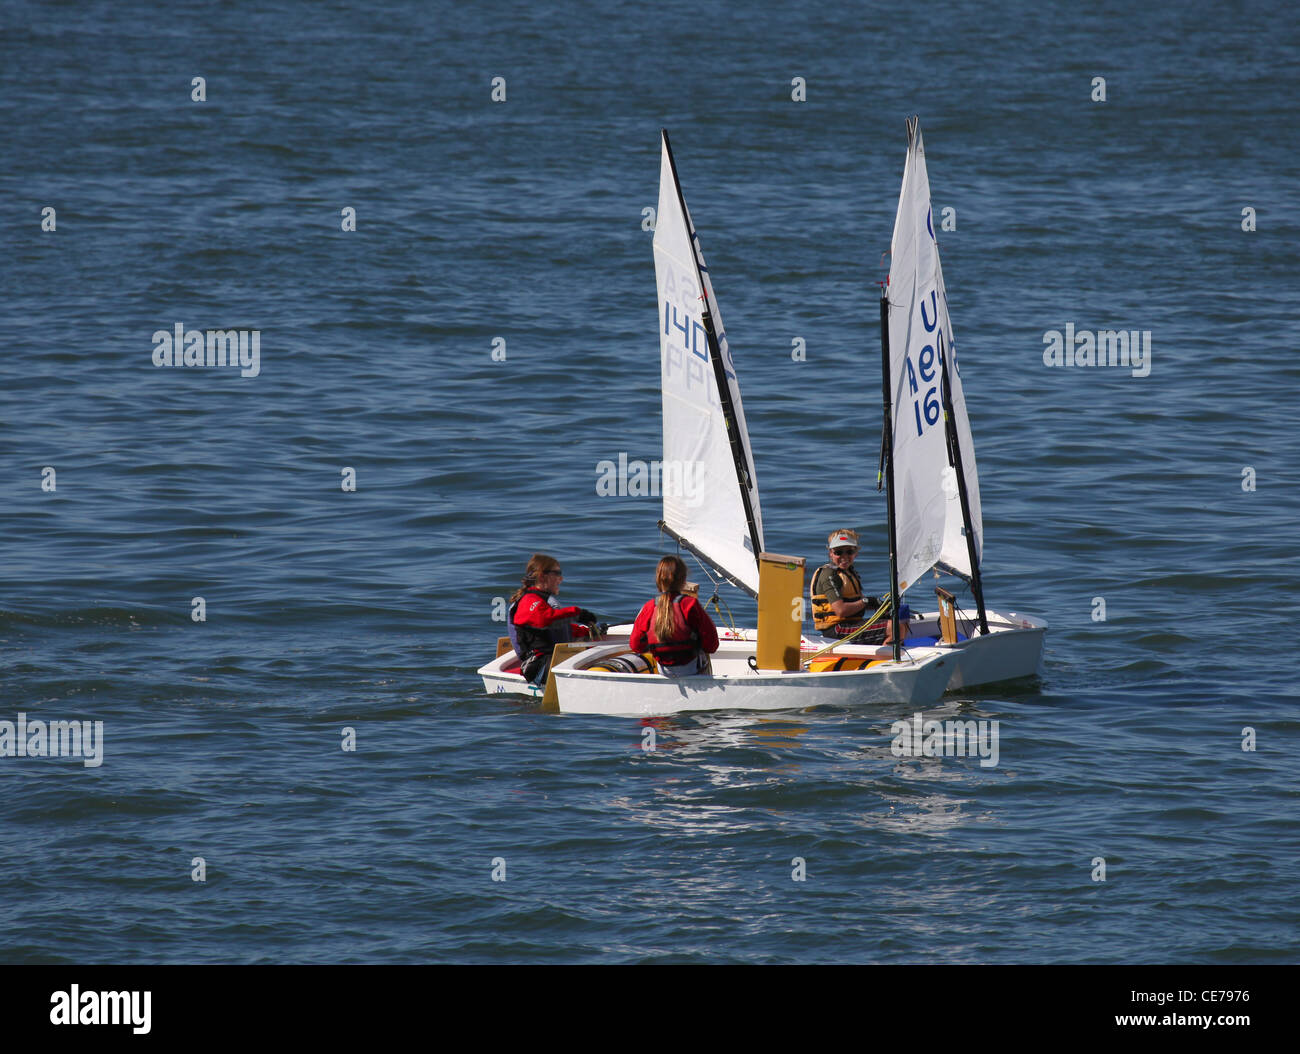 Three Optimist Class sailing dinghies in San Francisco Bay off Sausalito Stock Photo